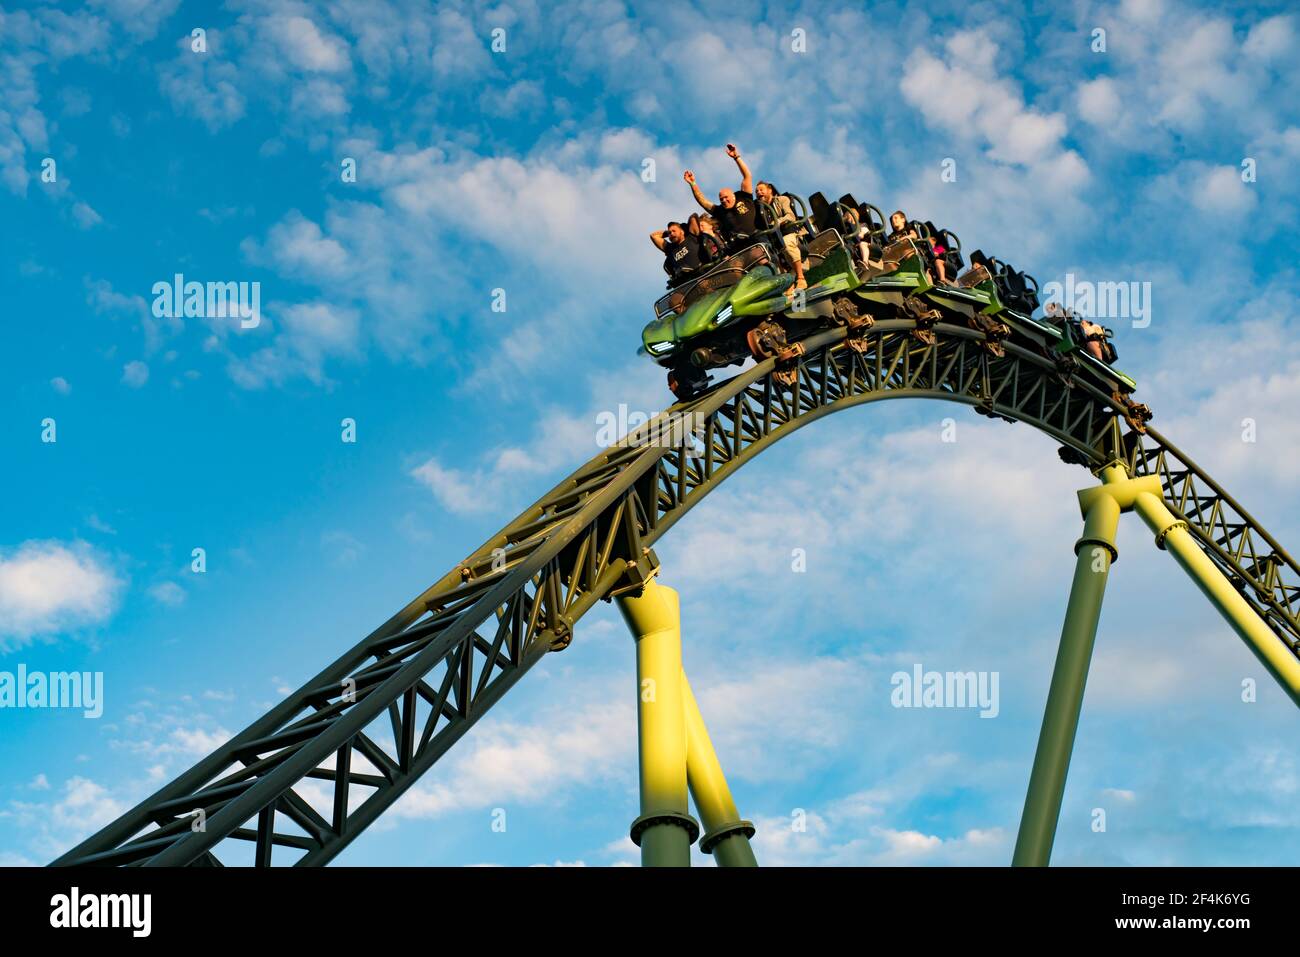 People screaming and holding up hands during roller coaster ride Helix Stock Photo